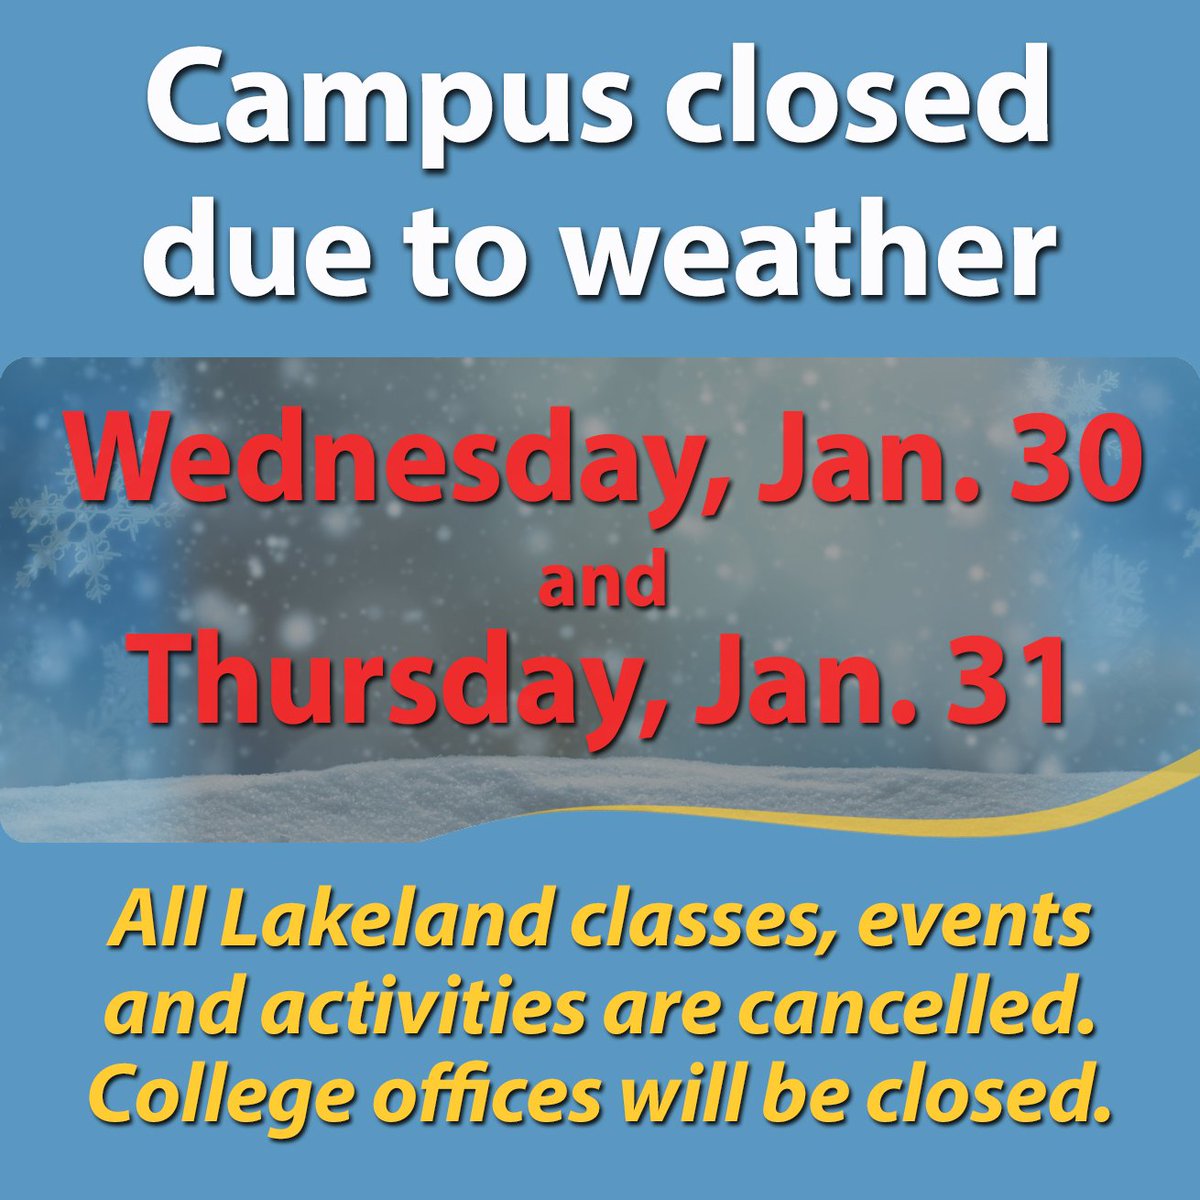 Campus remains open the rest of today, Tuesday, Jan. 29. Stay safe out there! #schoolclosings

For more information, visit lakelandcc.edu/closings